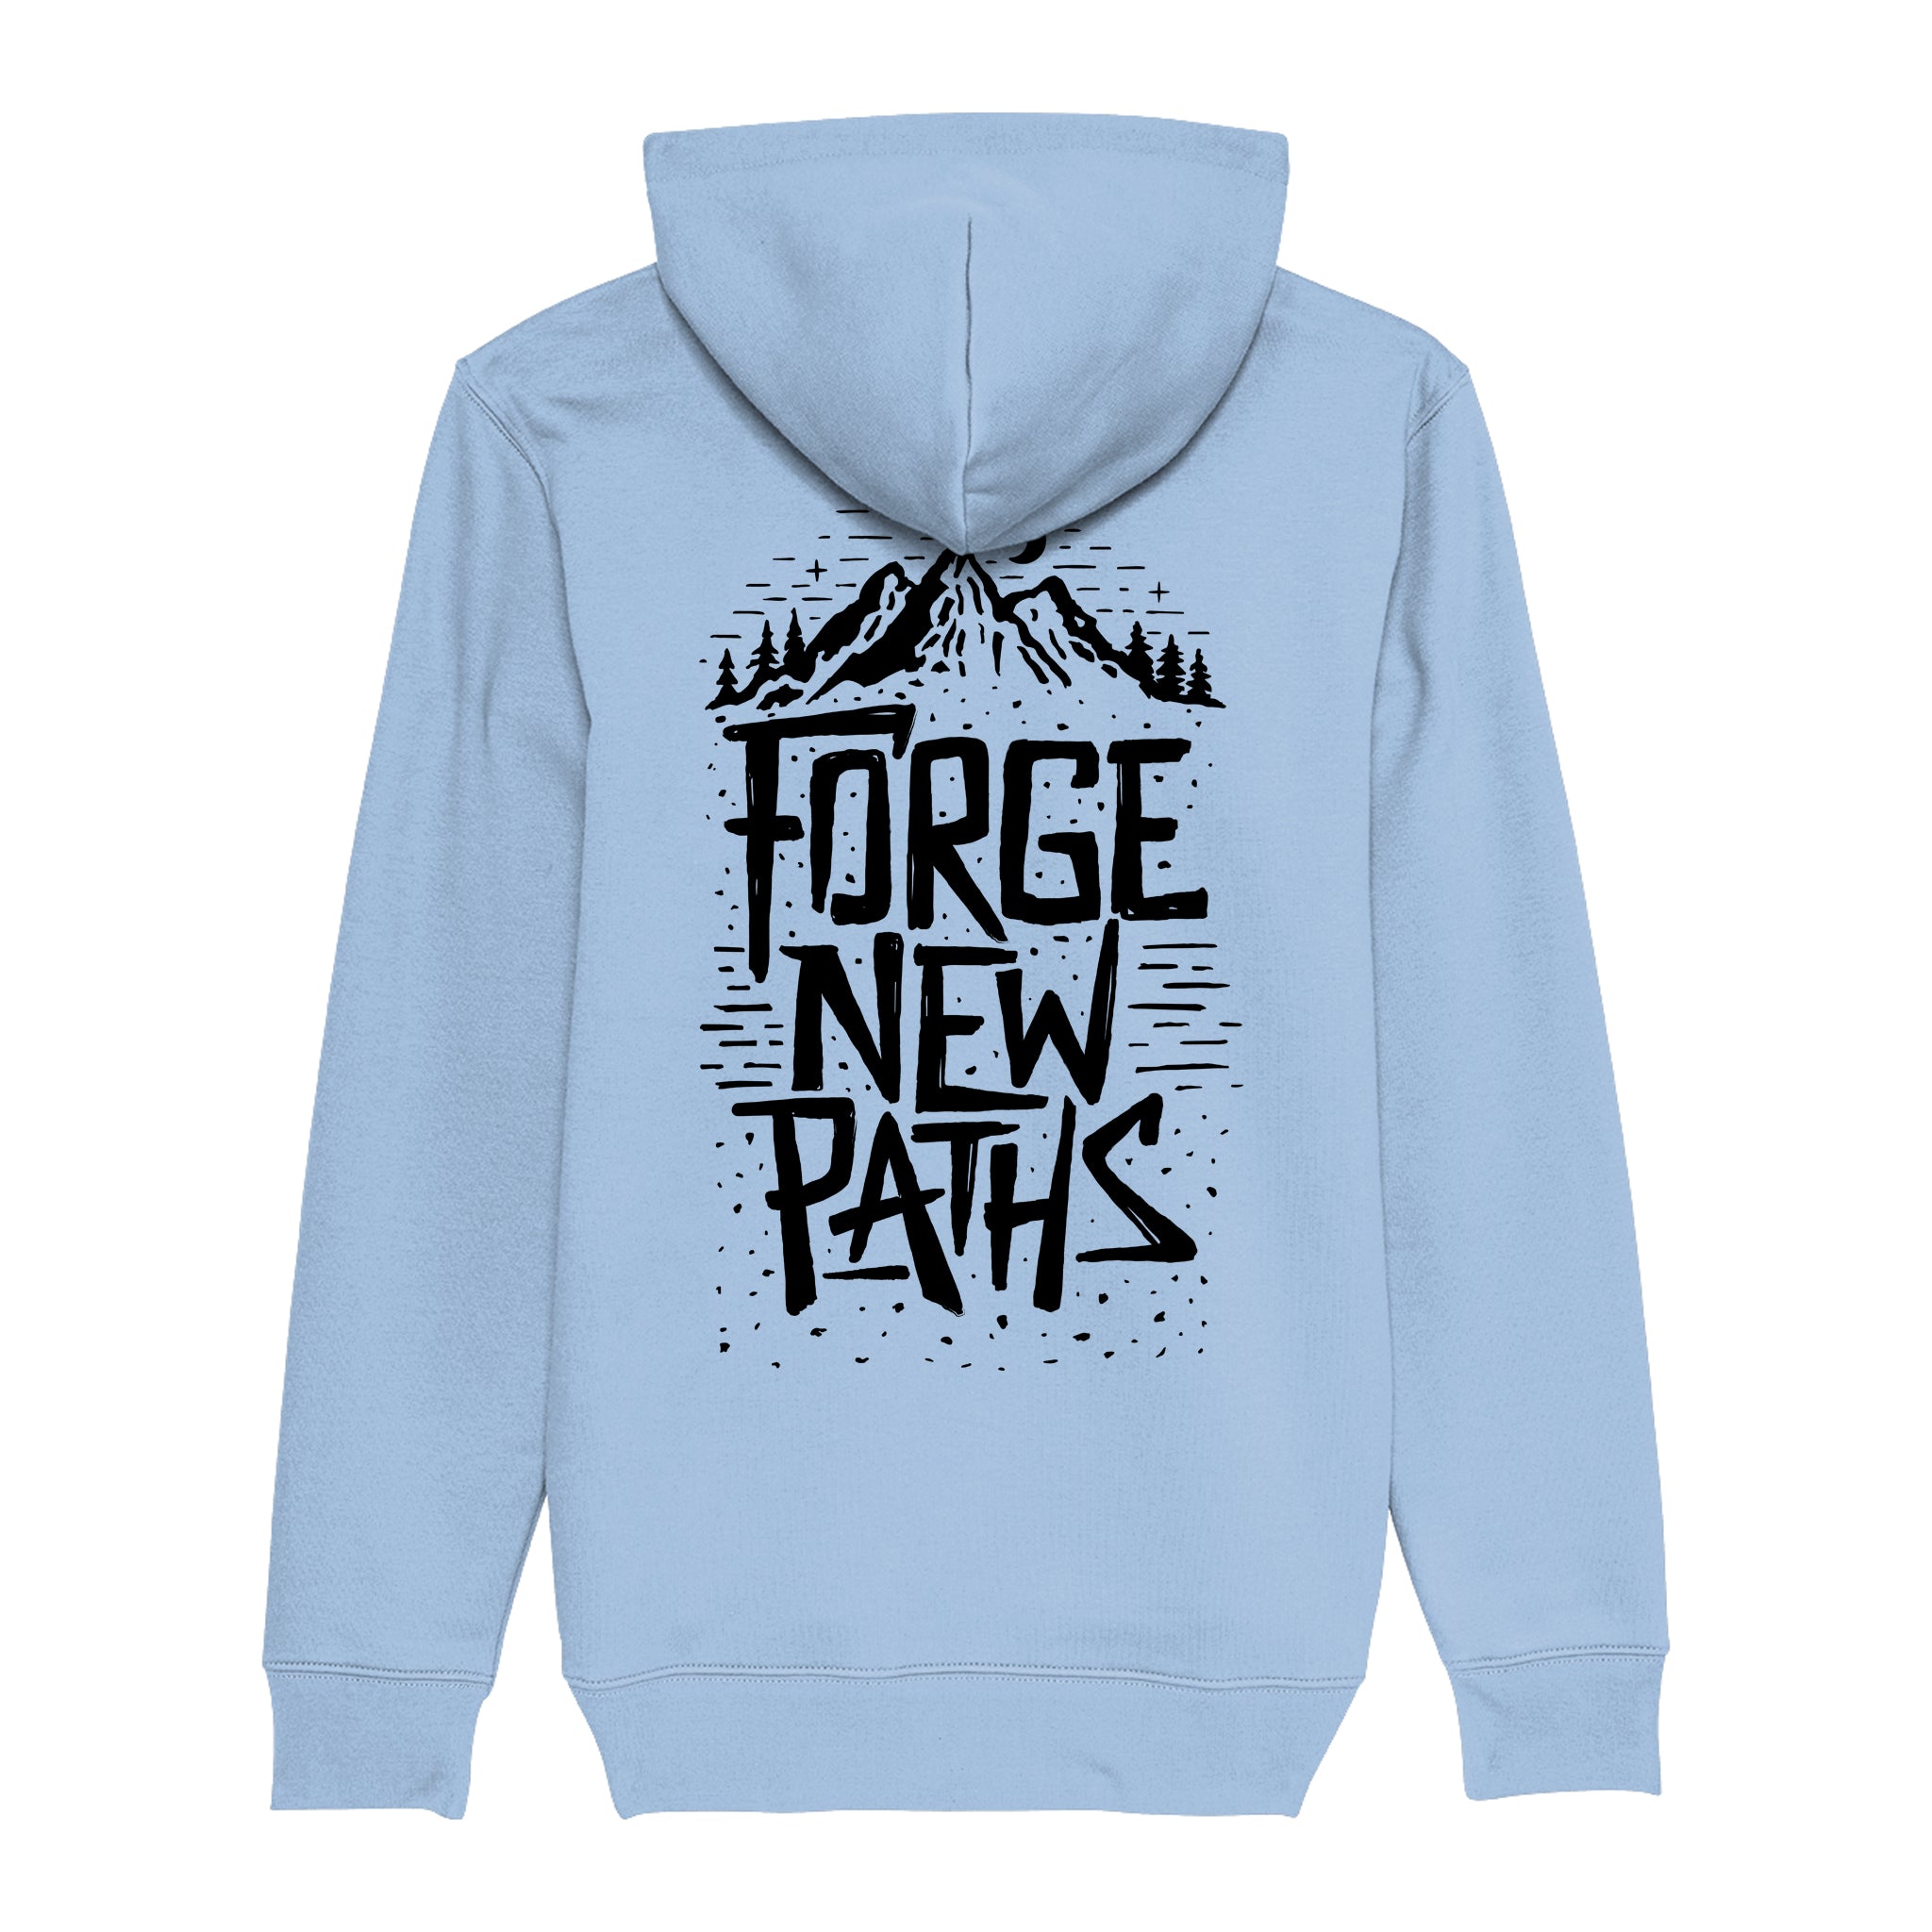 'Forge New Paths' Womens's Hoodies